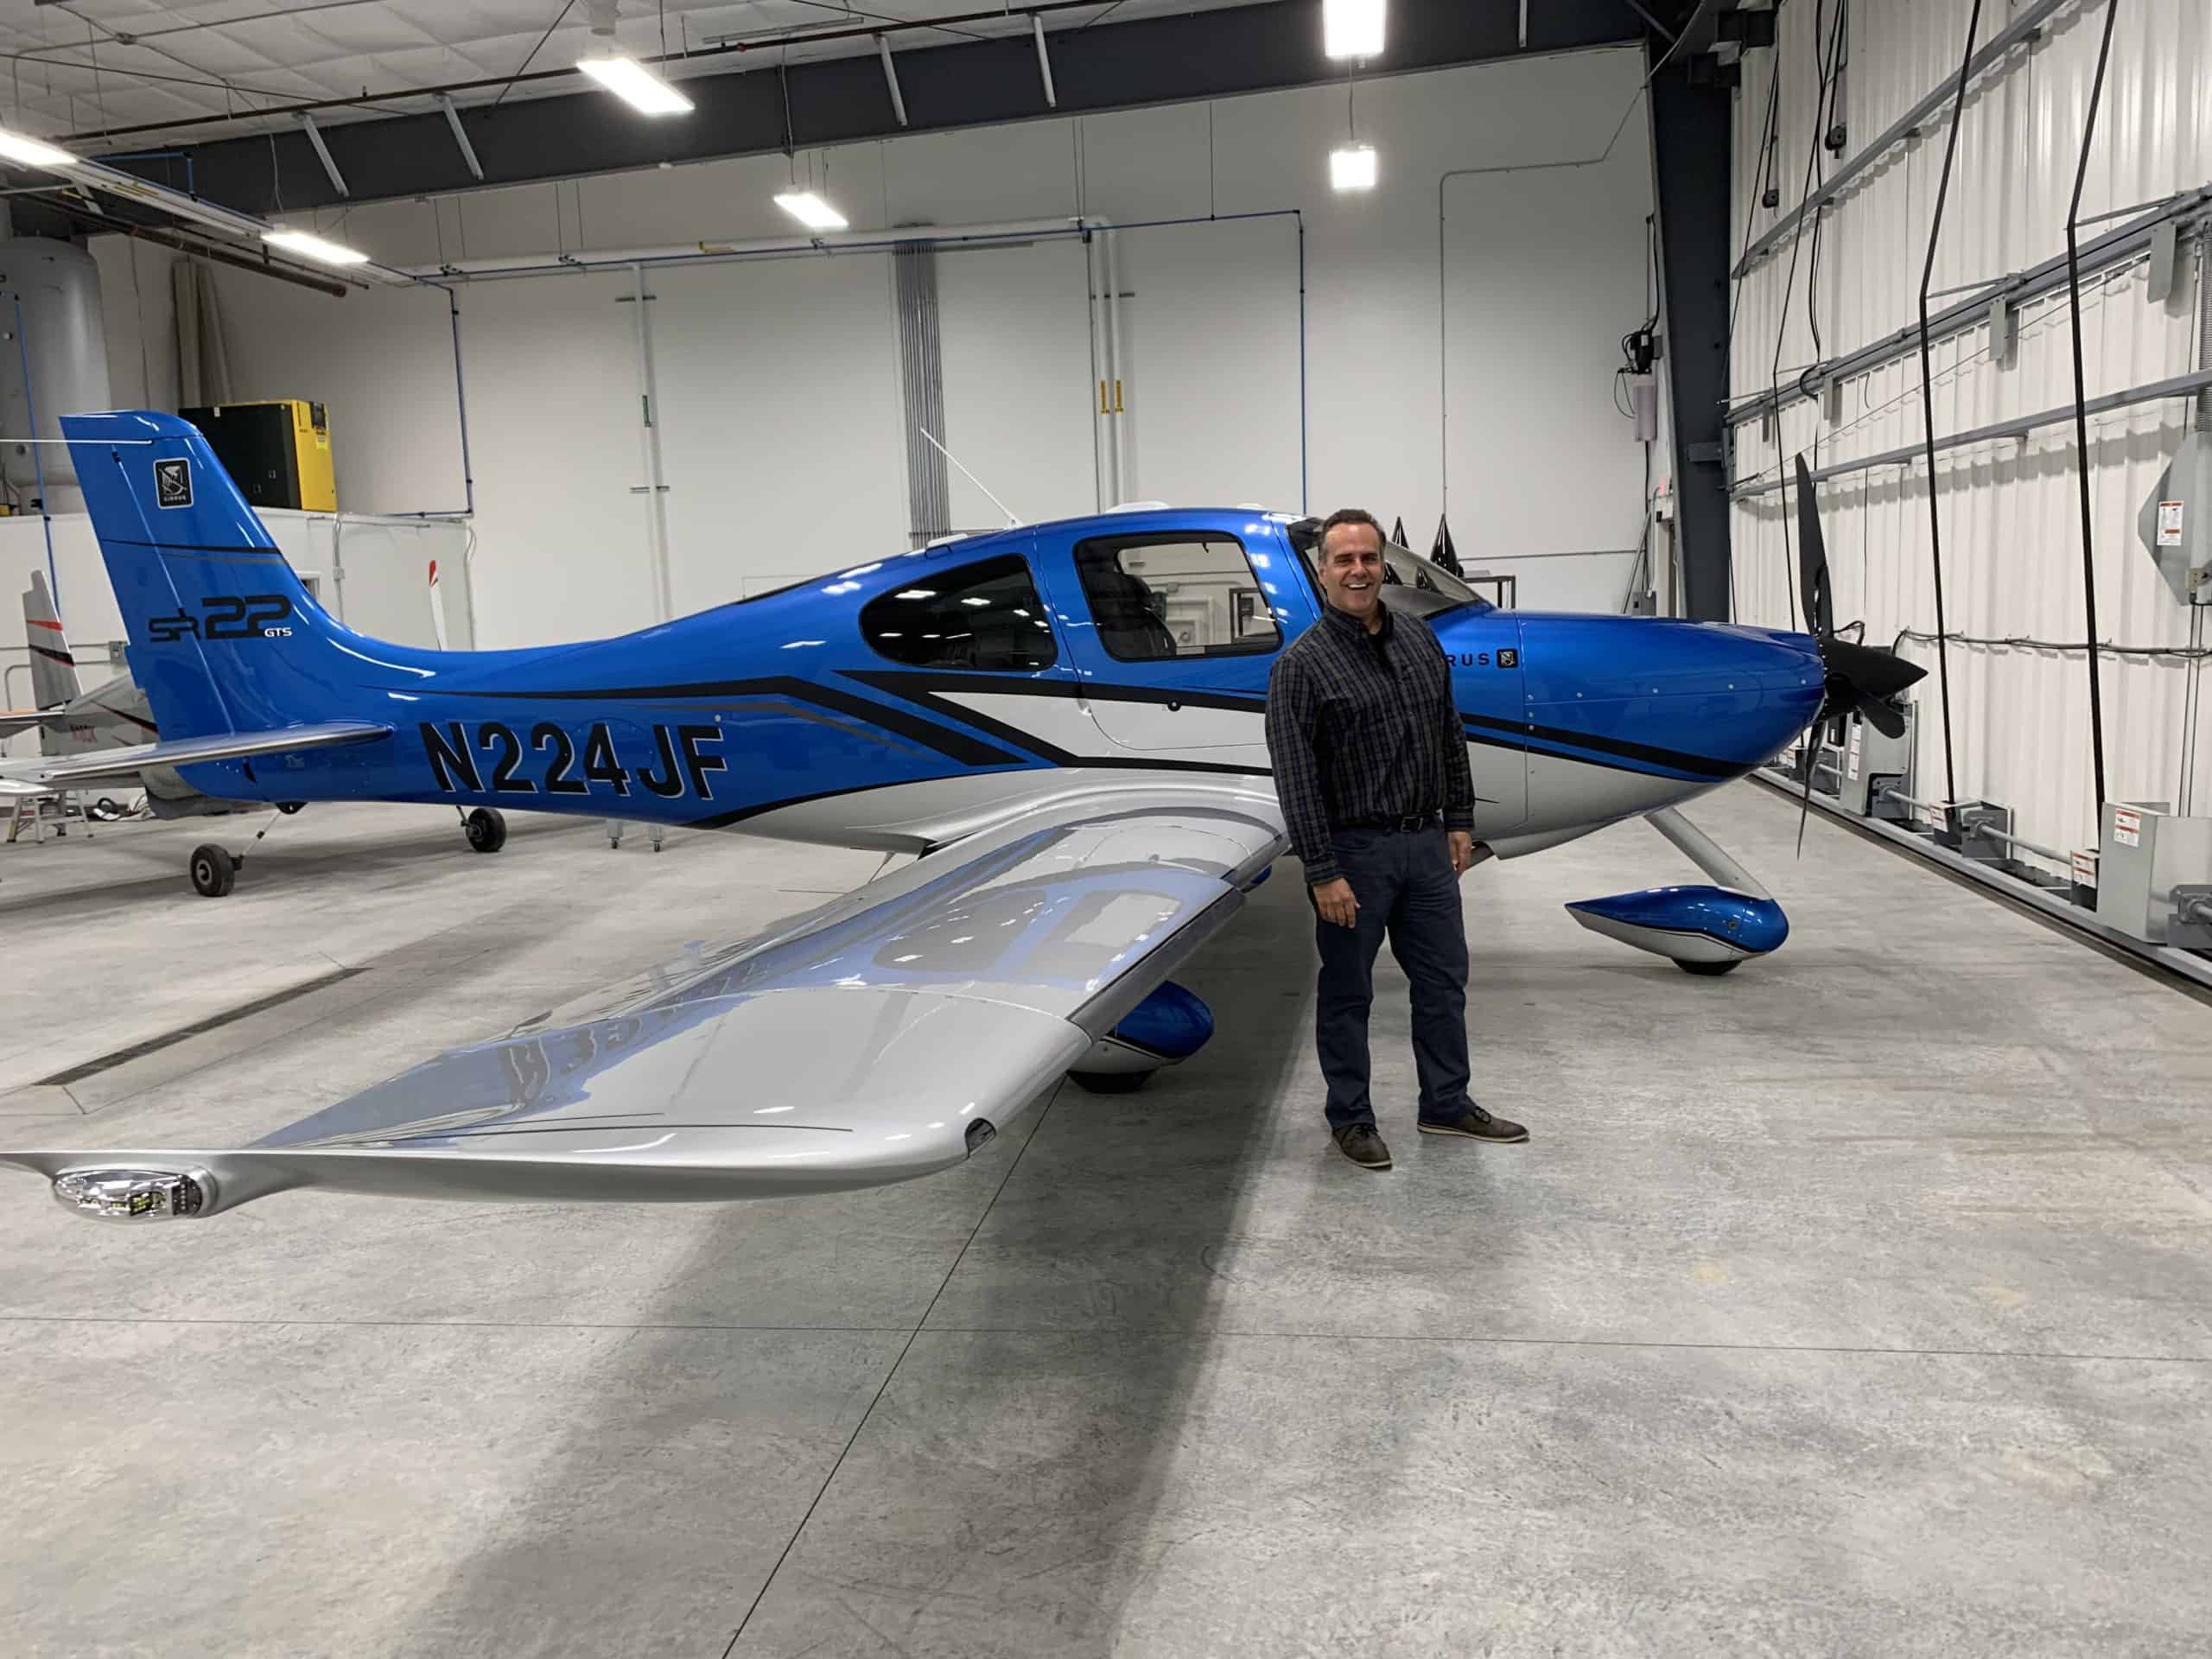 owner and his aircraft